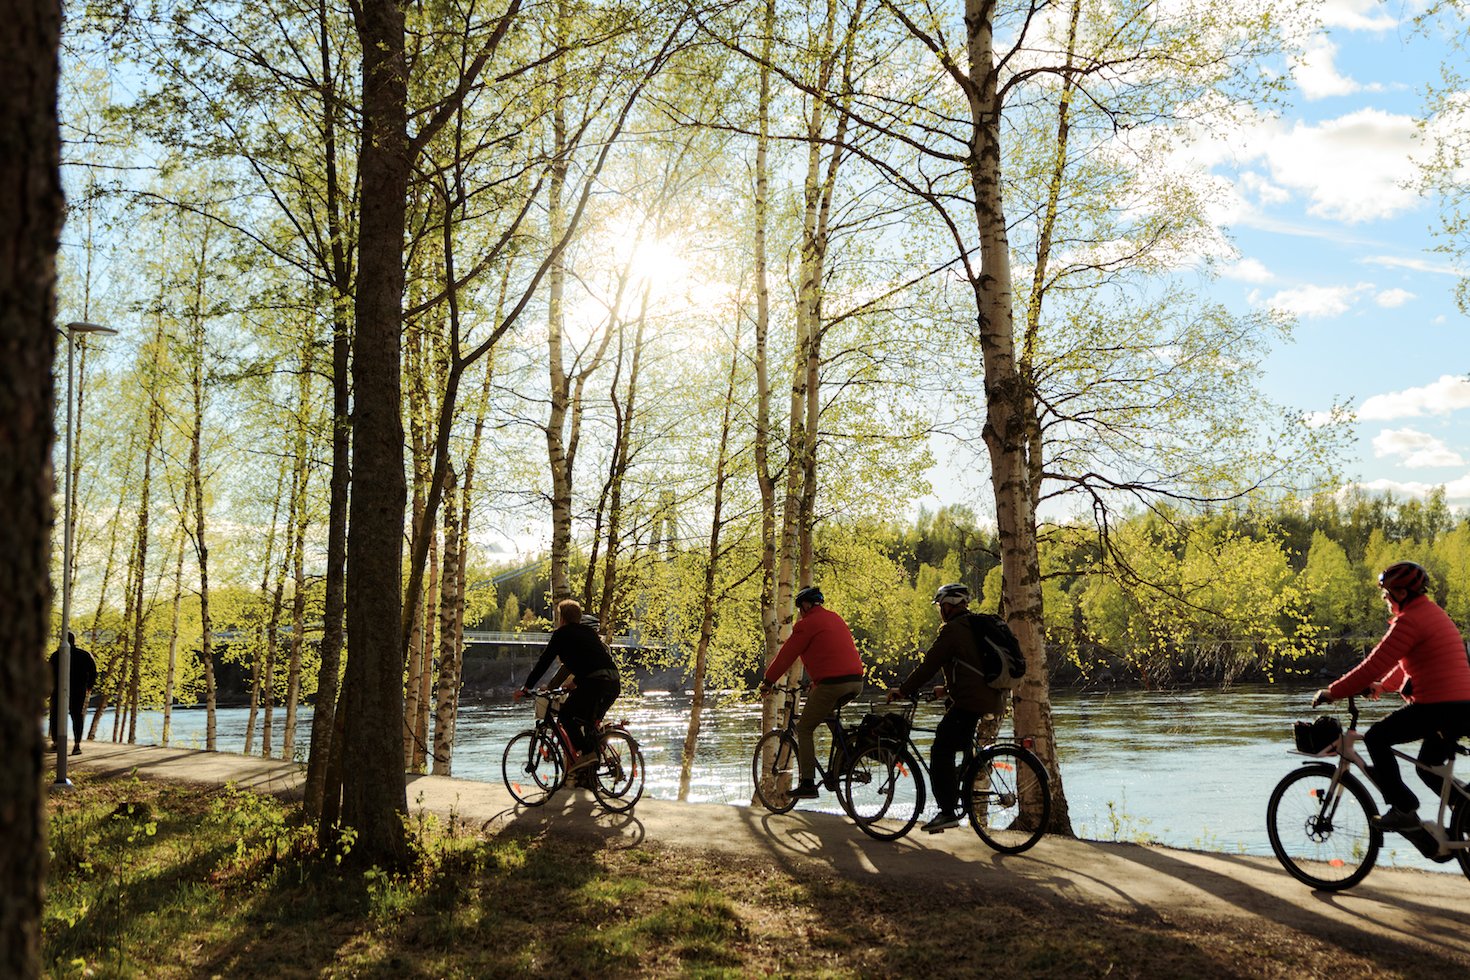 Cyclists by the river.